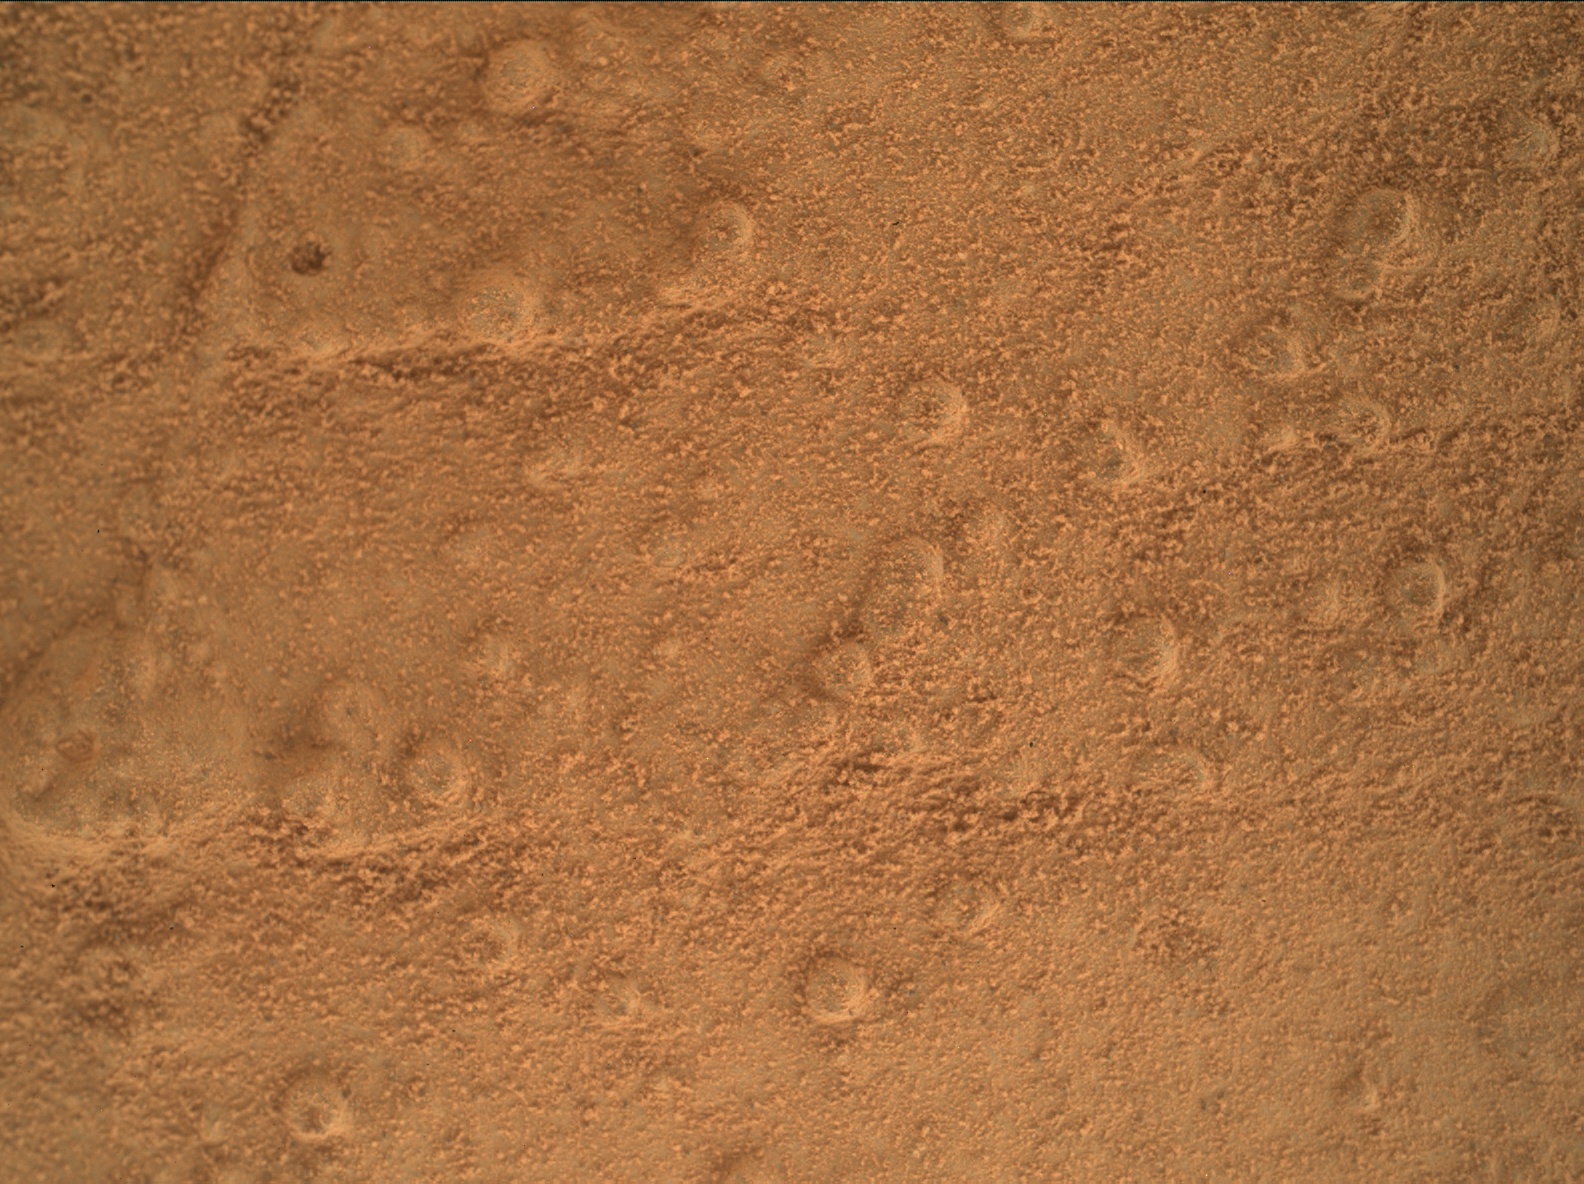 Nasa's Mars rover Curiosity acquired this image using its Mars Hand Lens Imager (MAHLI) on Sol 169